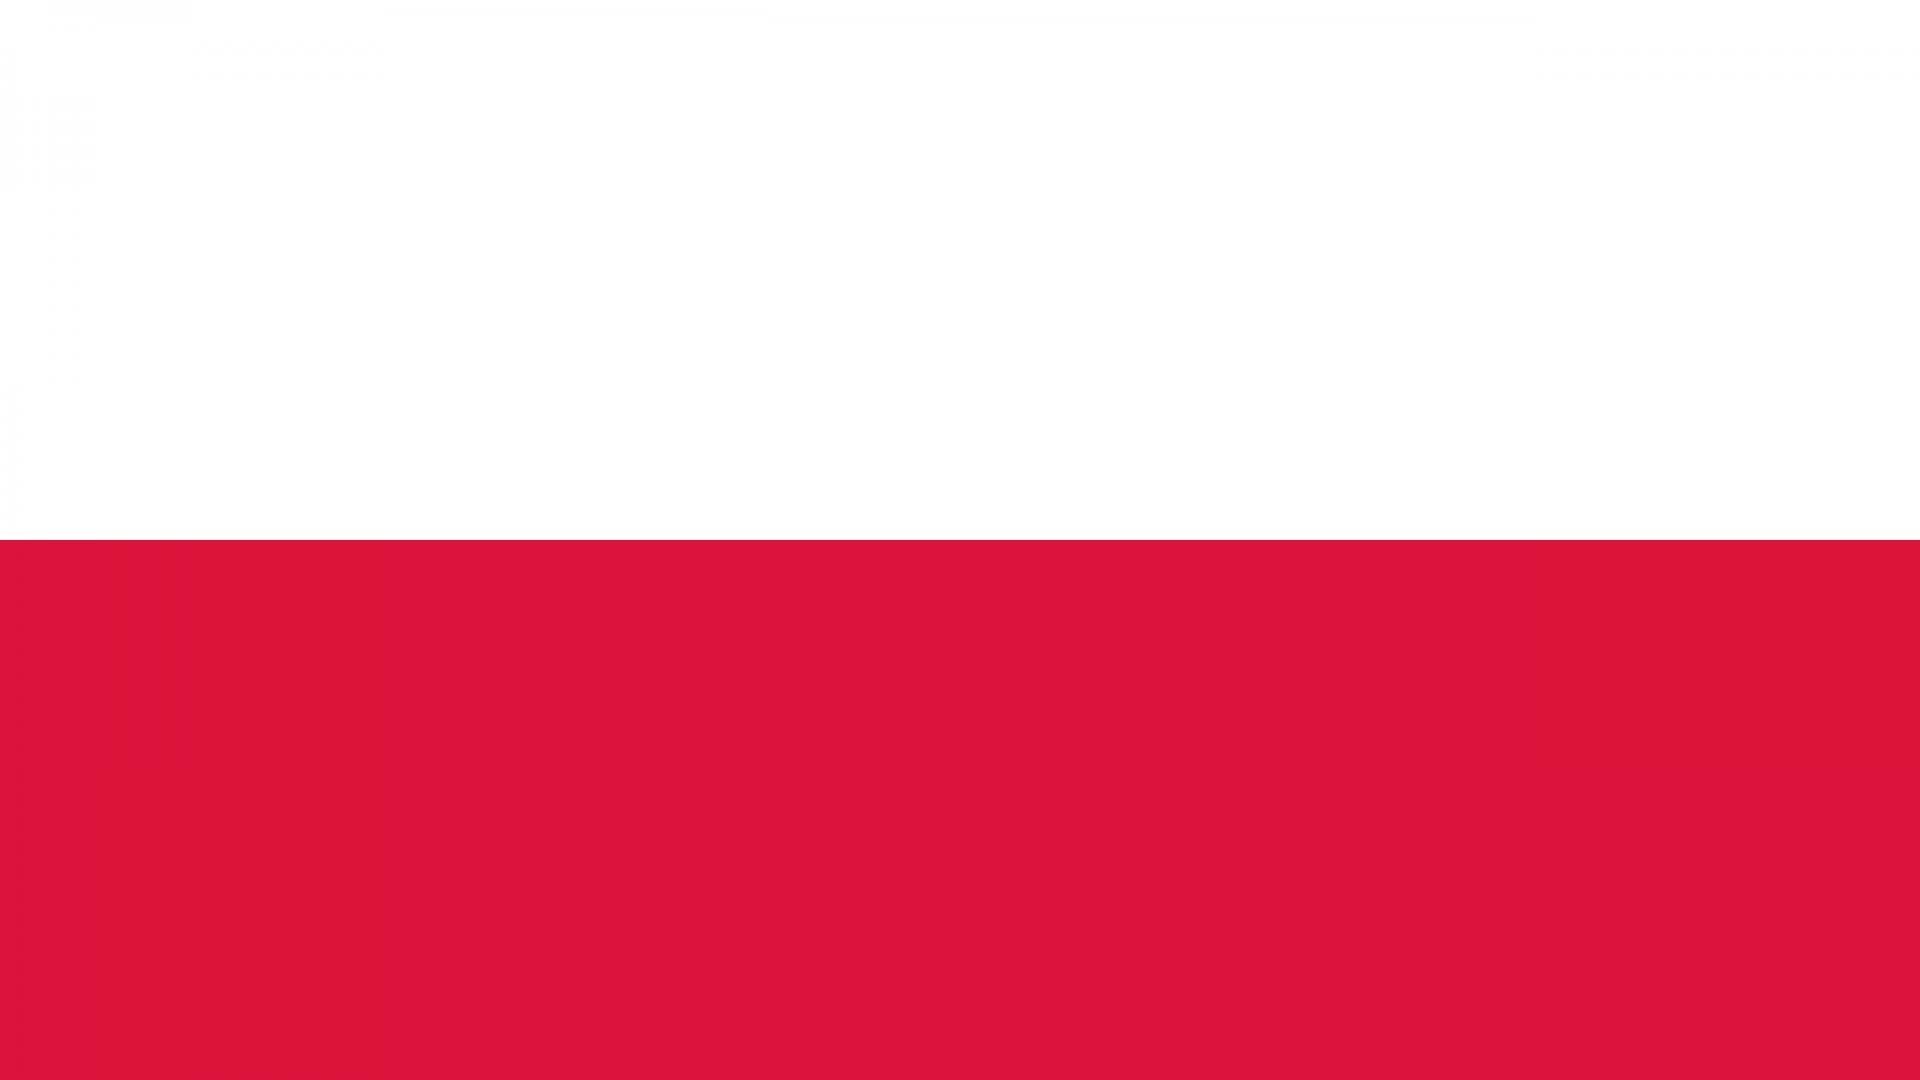 Free download Poland Flag Wallpaper High Definition High Quality